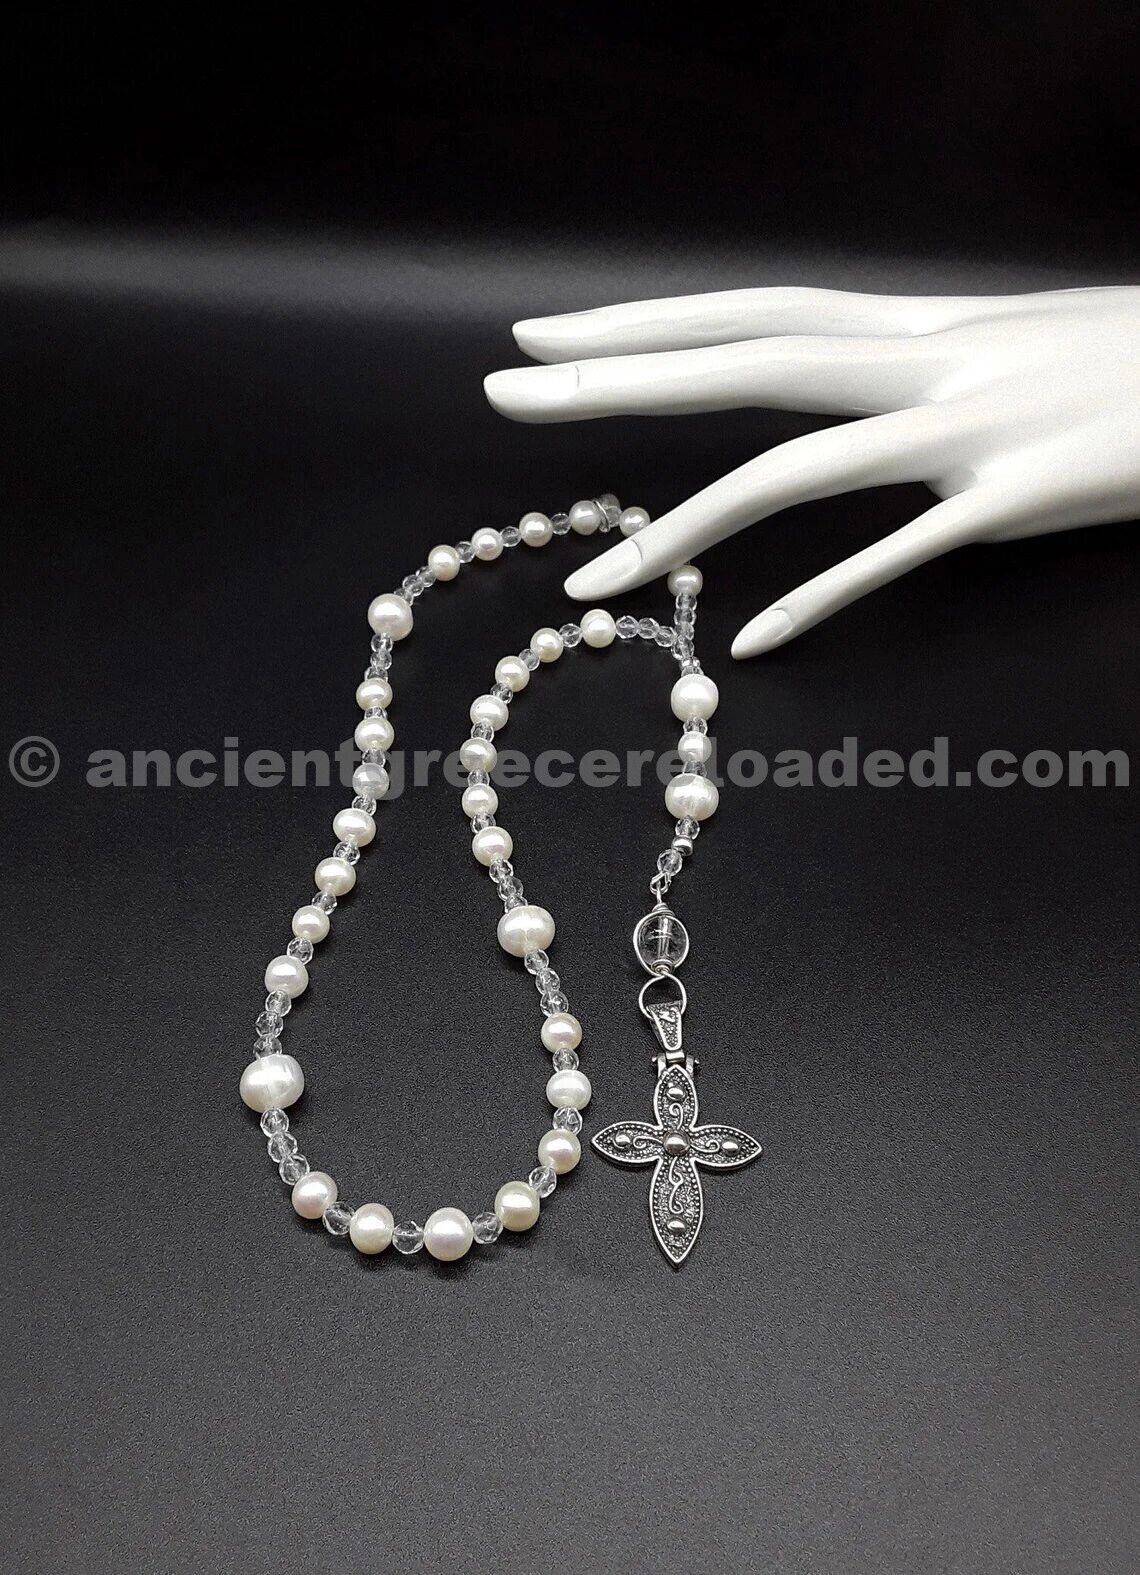 The White Pearl Anglican Vintage Rosary Necklace, pure 925 Silver Cross